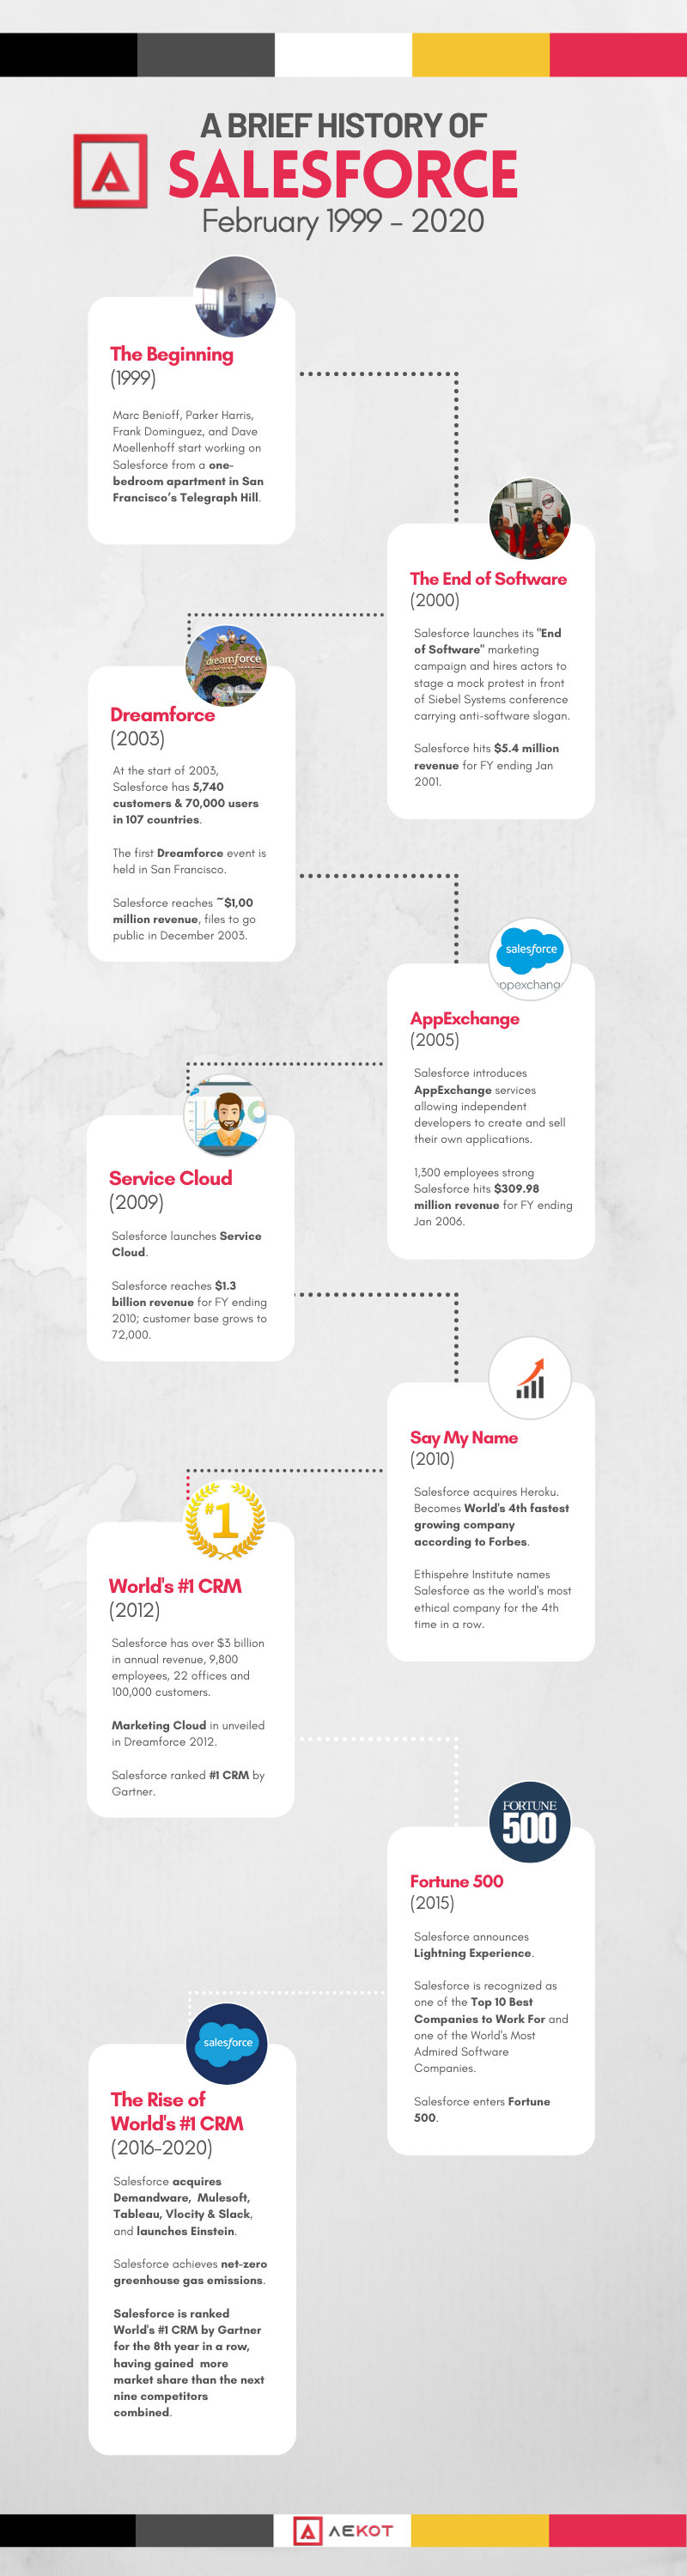 a brief history of salesforce - infographic